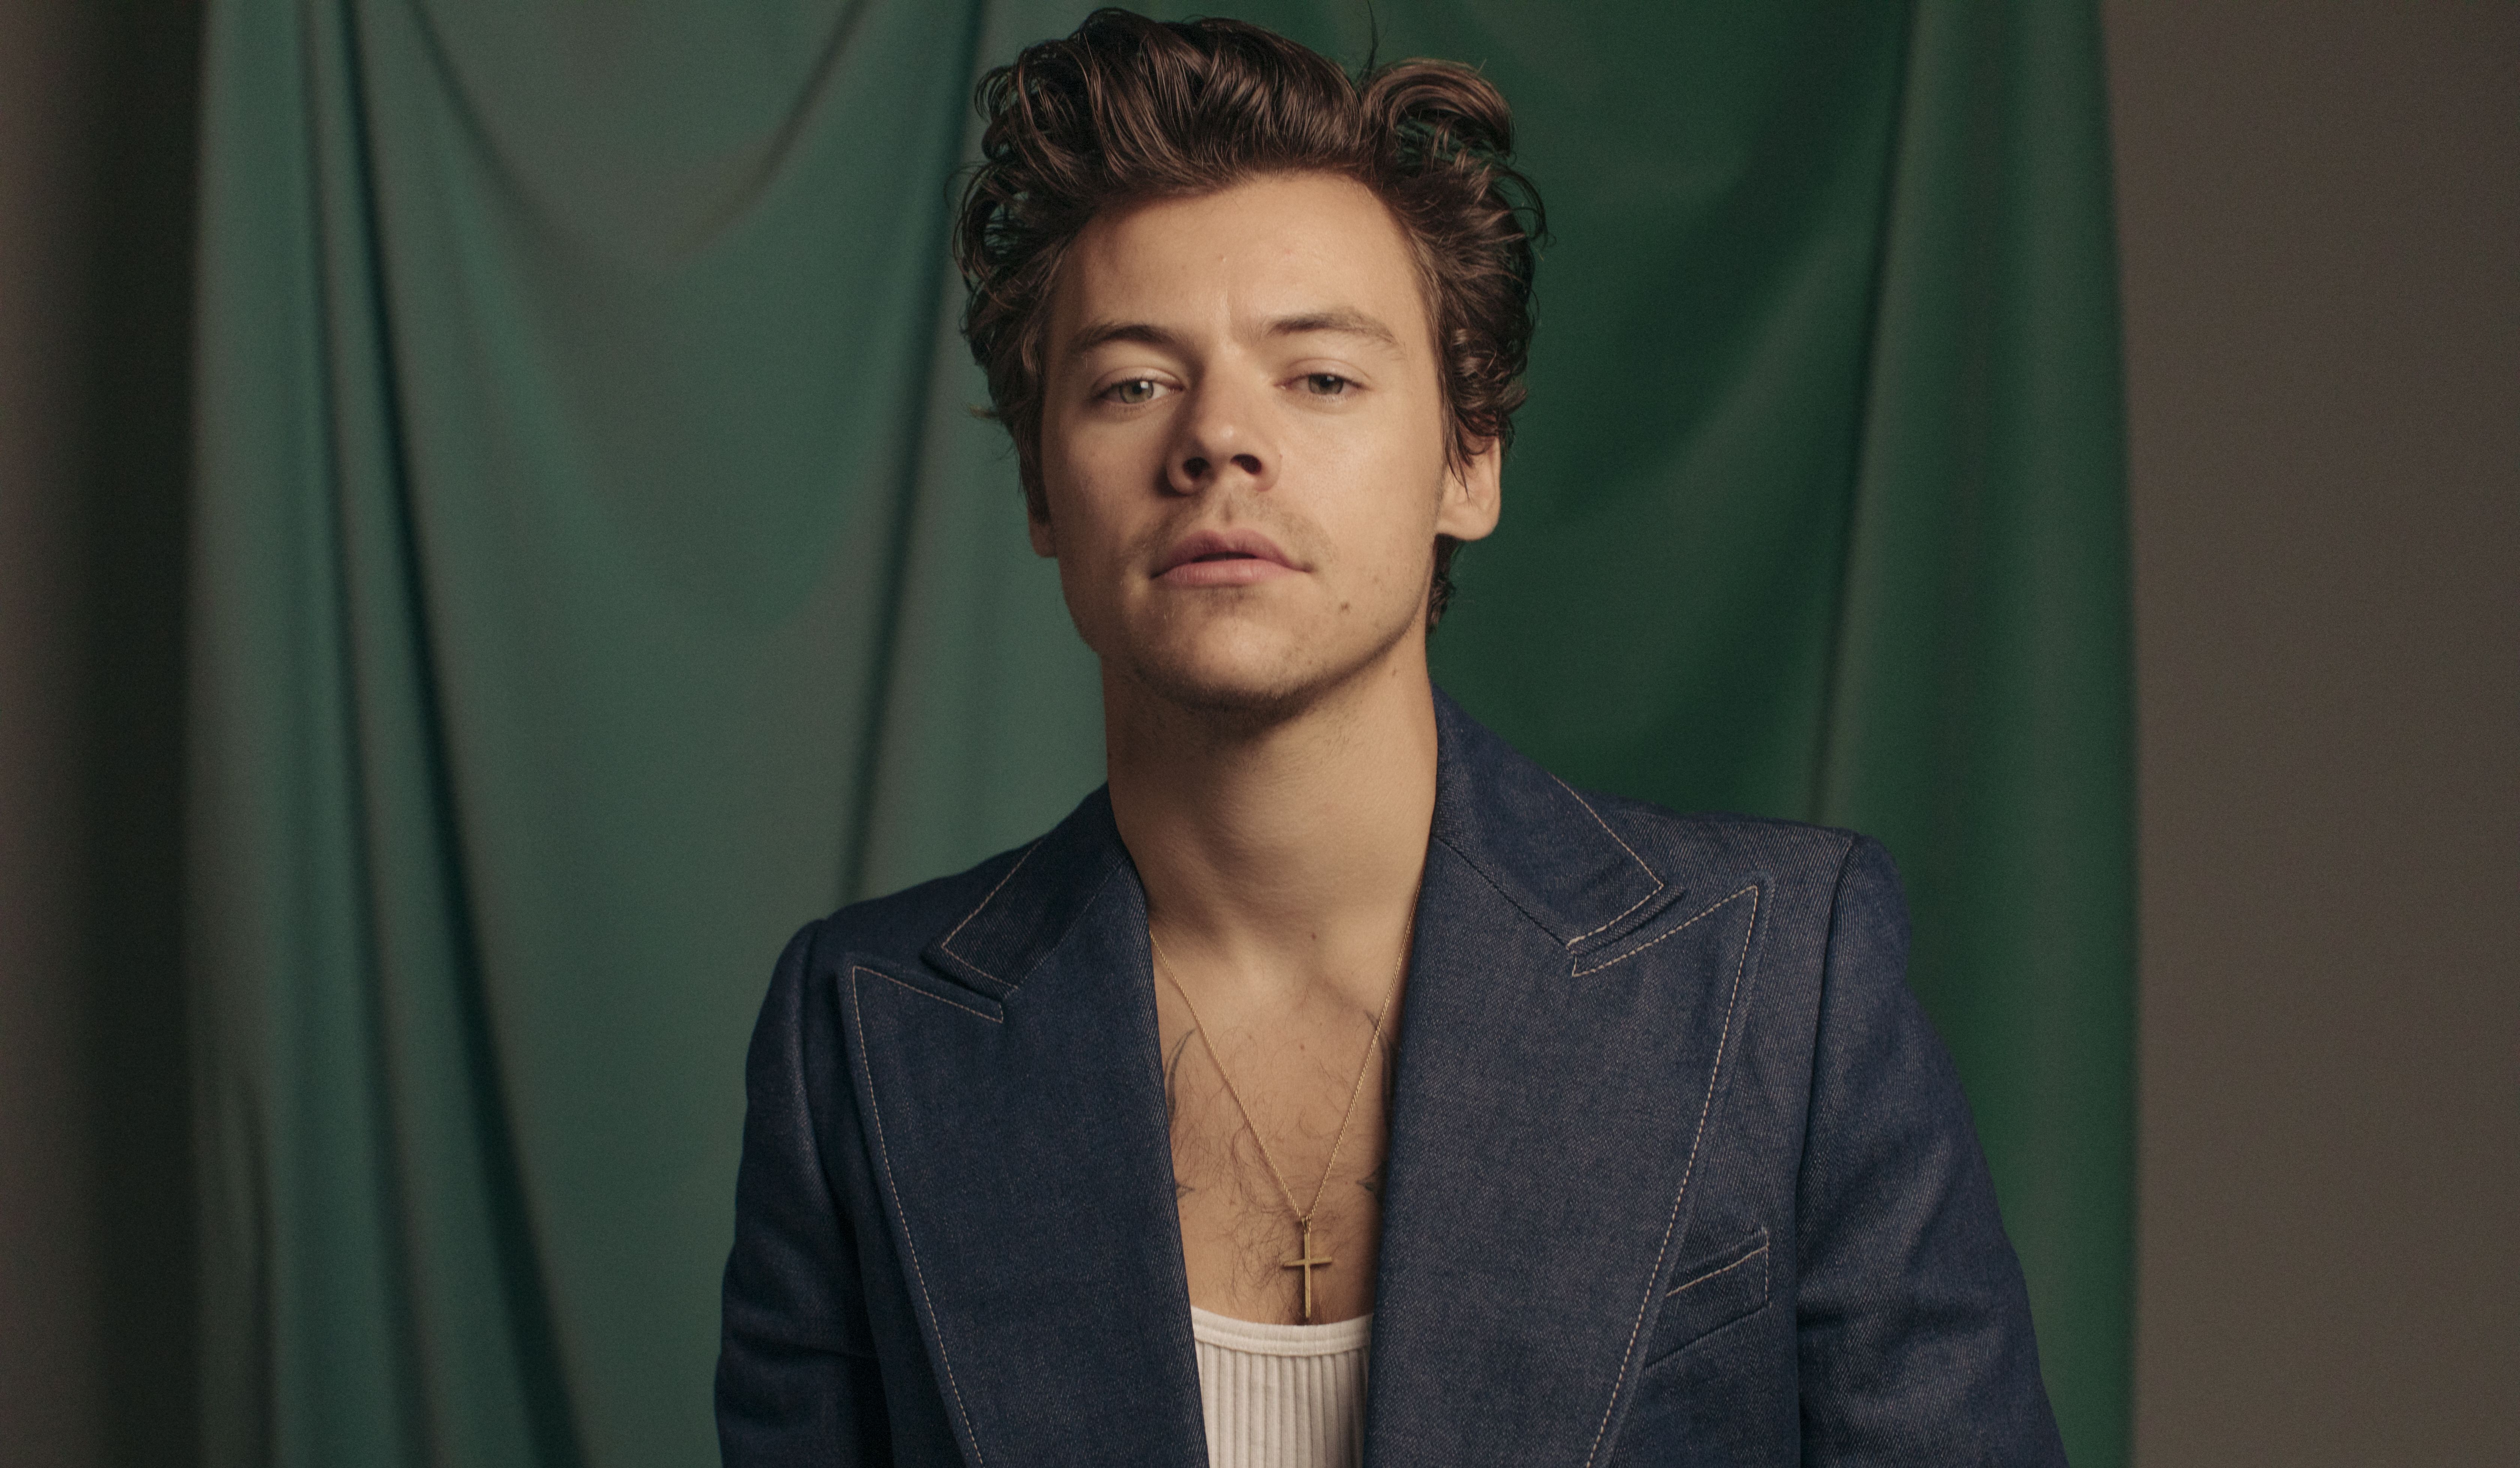 harry styles photoshoot in london, 2019, october 1st, by hélène marie pambrun